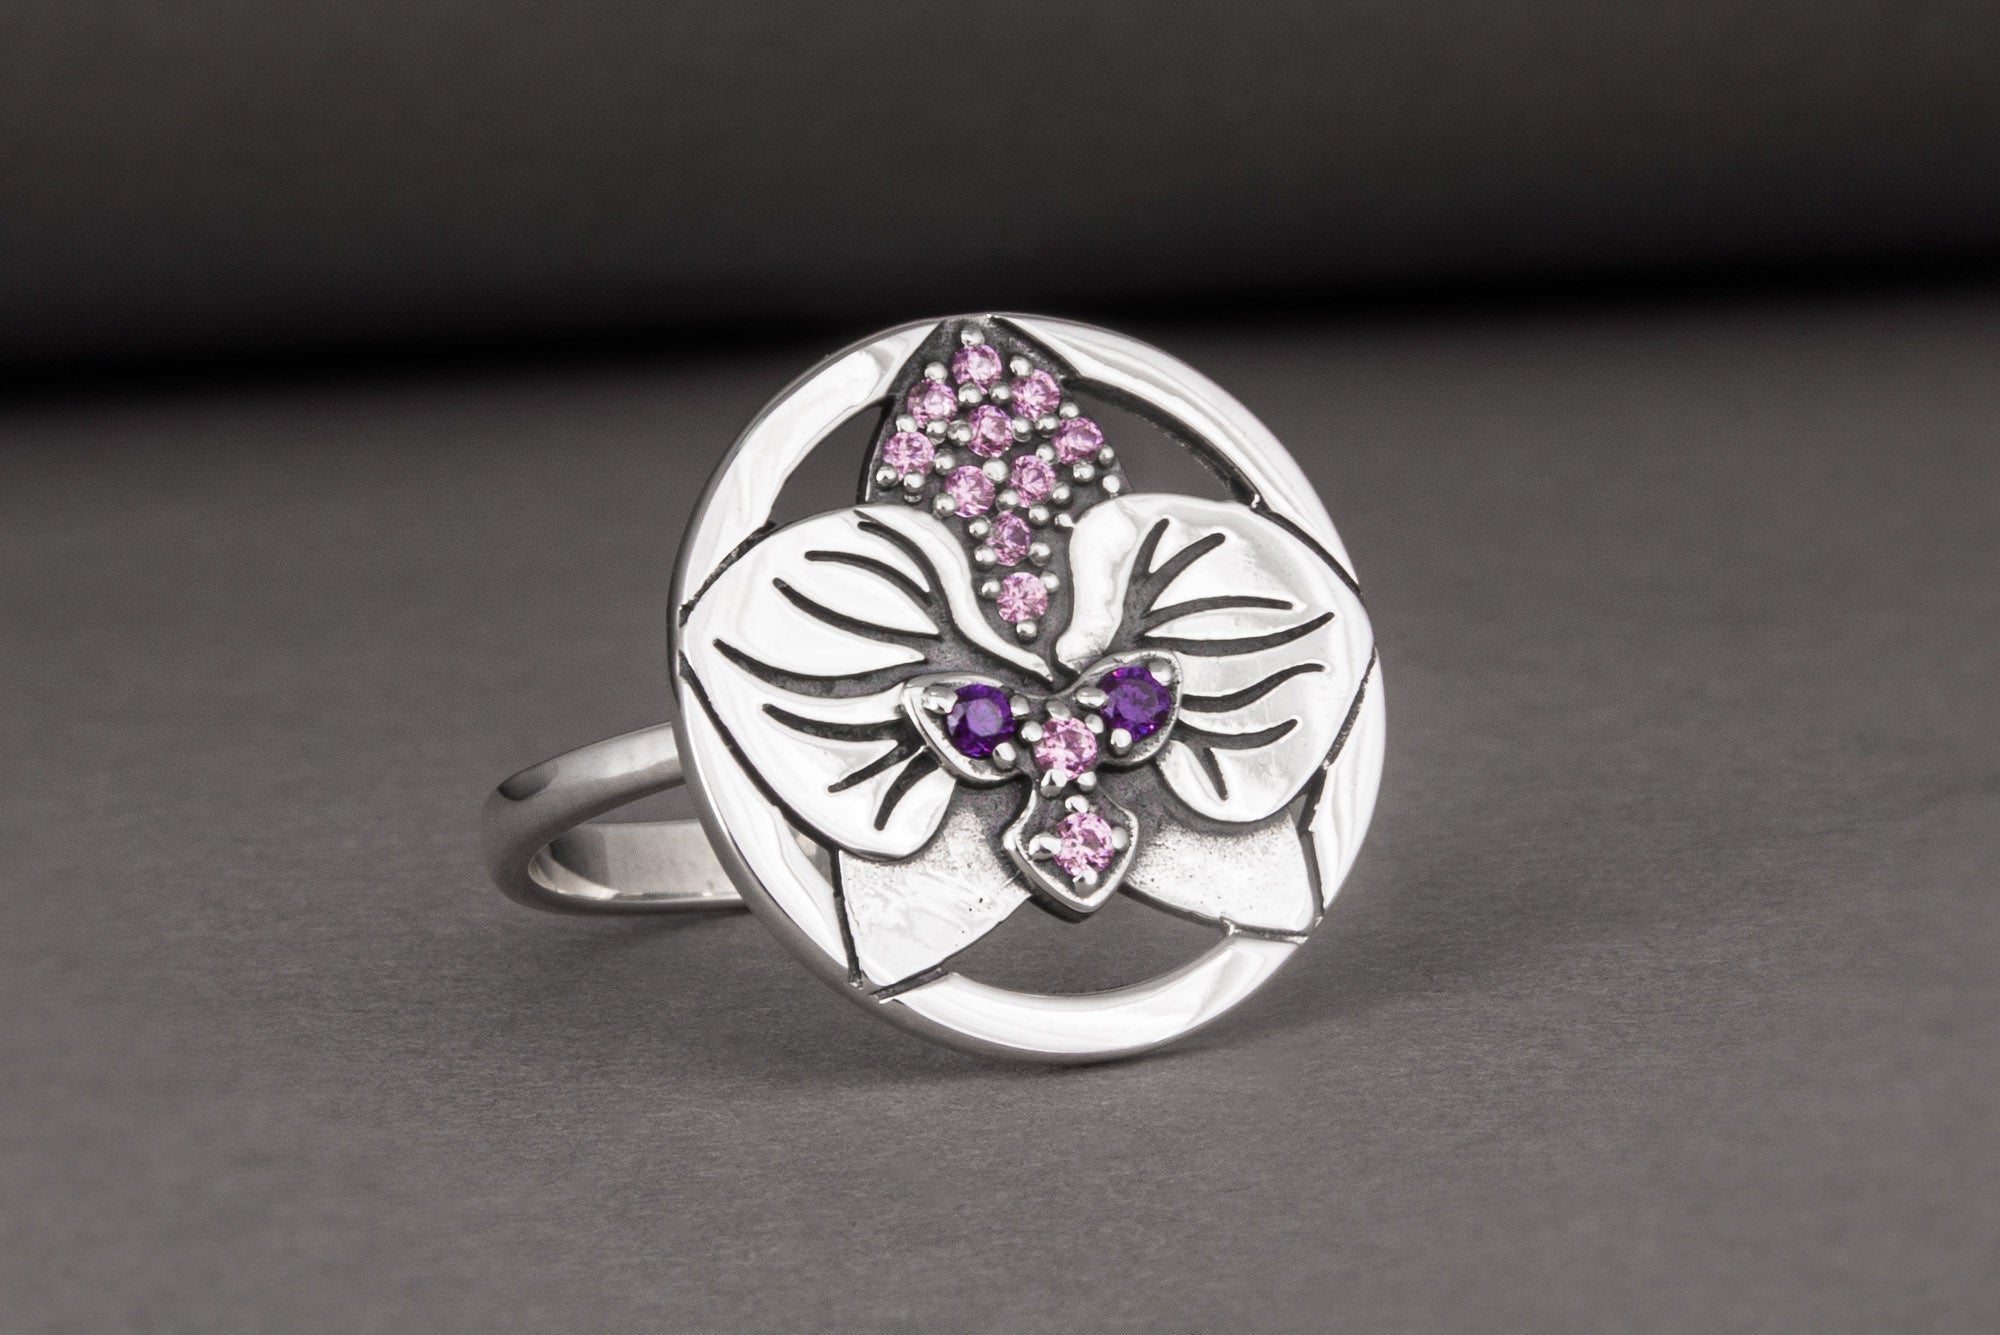 Minimalistic Round 925 Silver Ring with Orchid Flower and Gems, Unique Fashion Jewelry - vikingworkshop